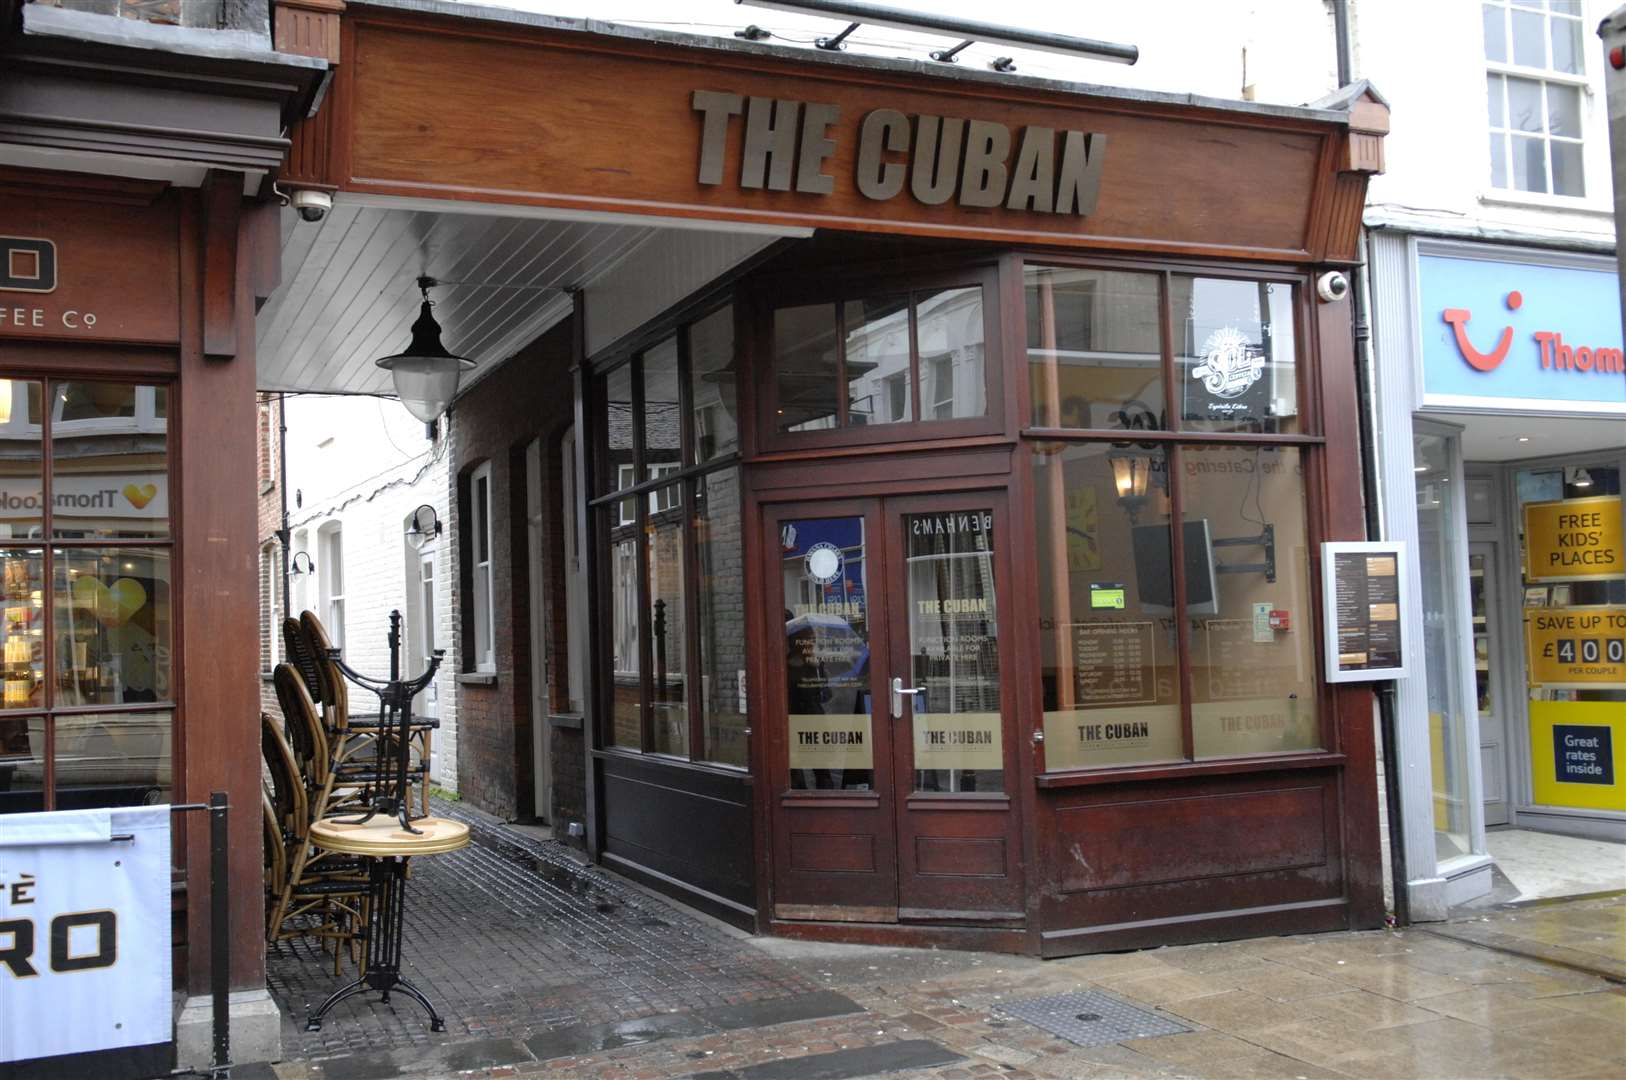 The incident took place at The Cuban in High Street, Canterbury